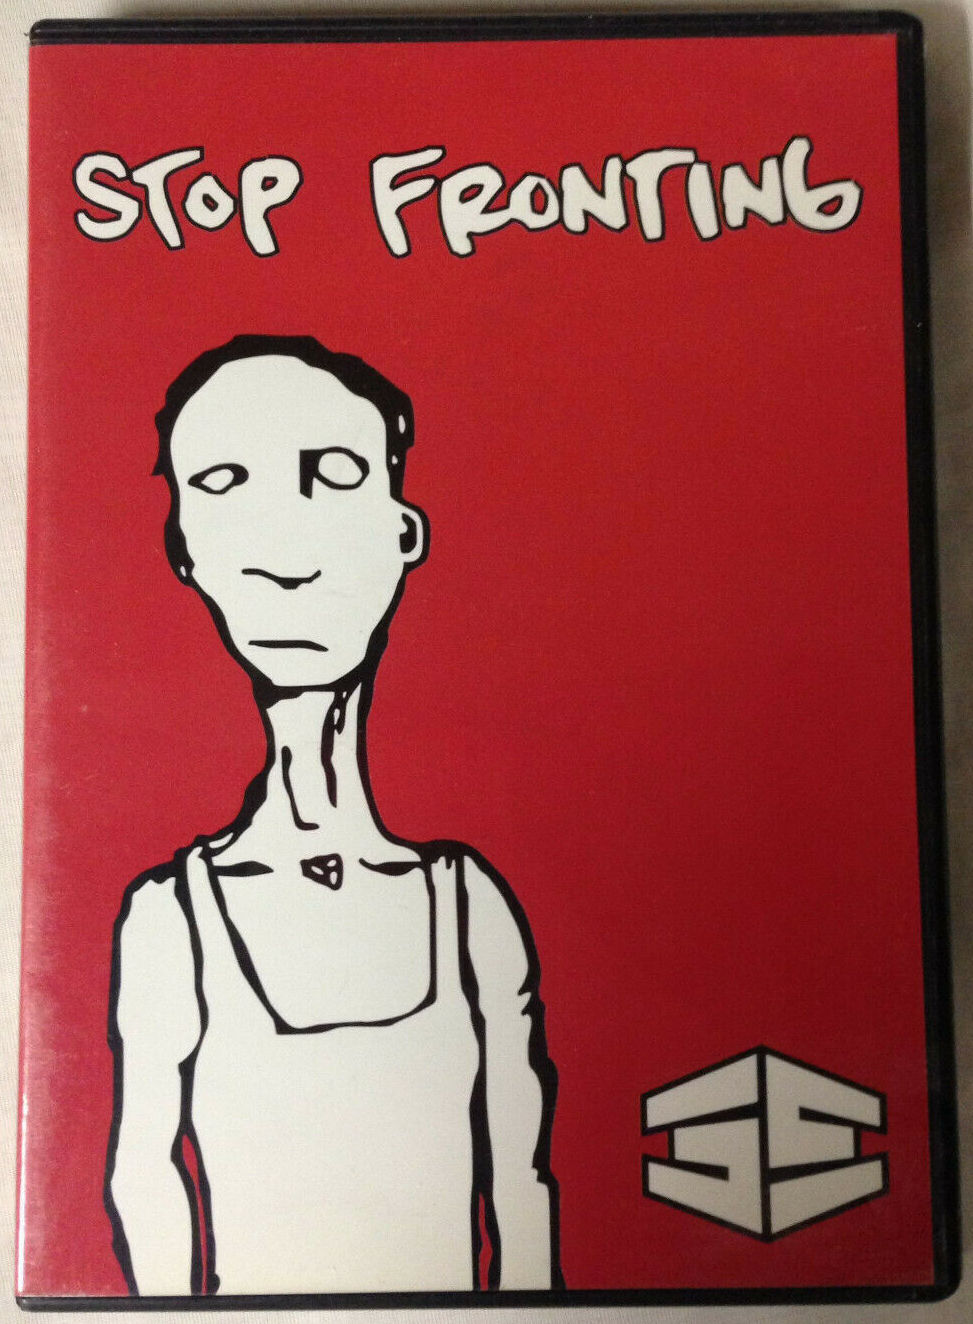 35th North - Stop Fronting cover art